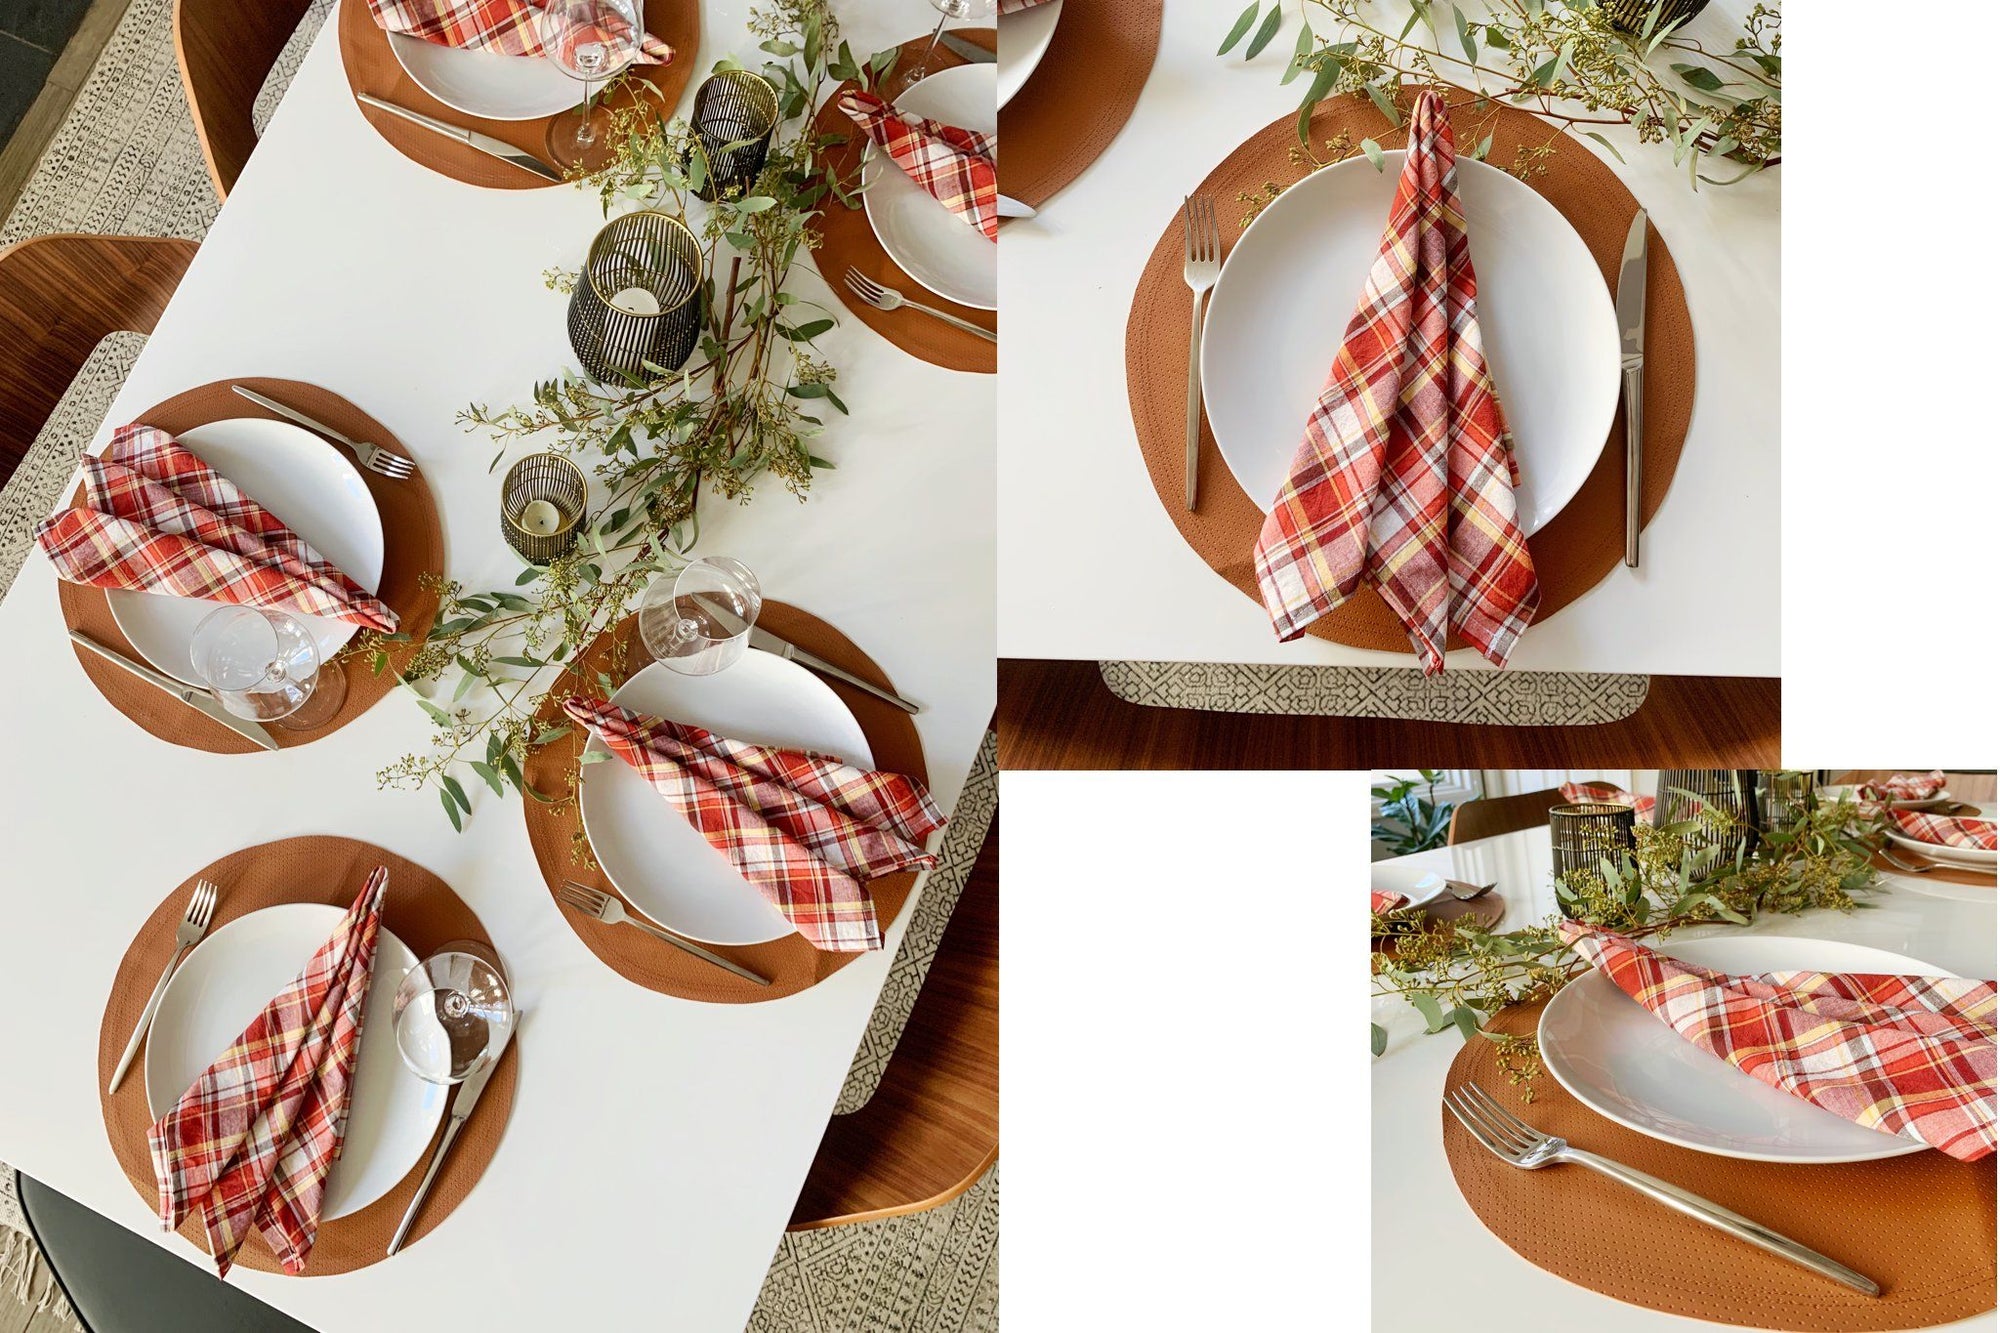 DIY Faux Leather Placemats and Plaid Napkins for Holiday Table Tutorial